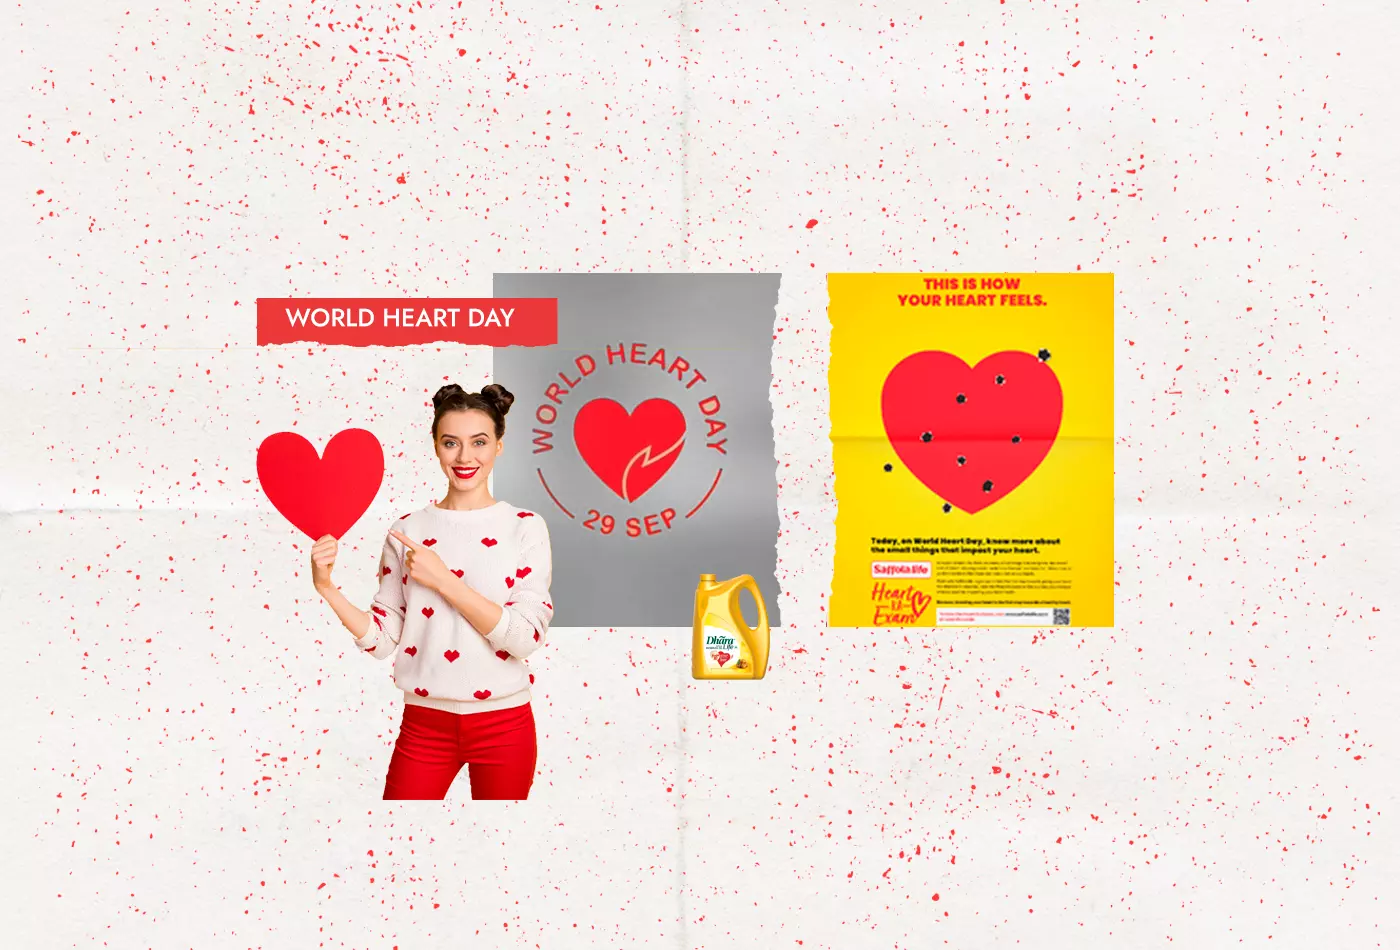 Spreading awareness and information: Ad campaigns for World Heart Day